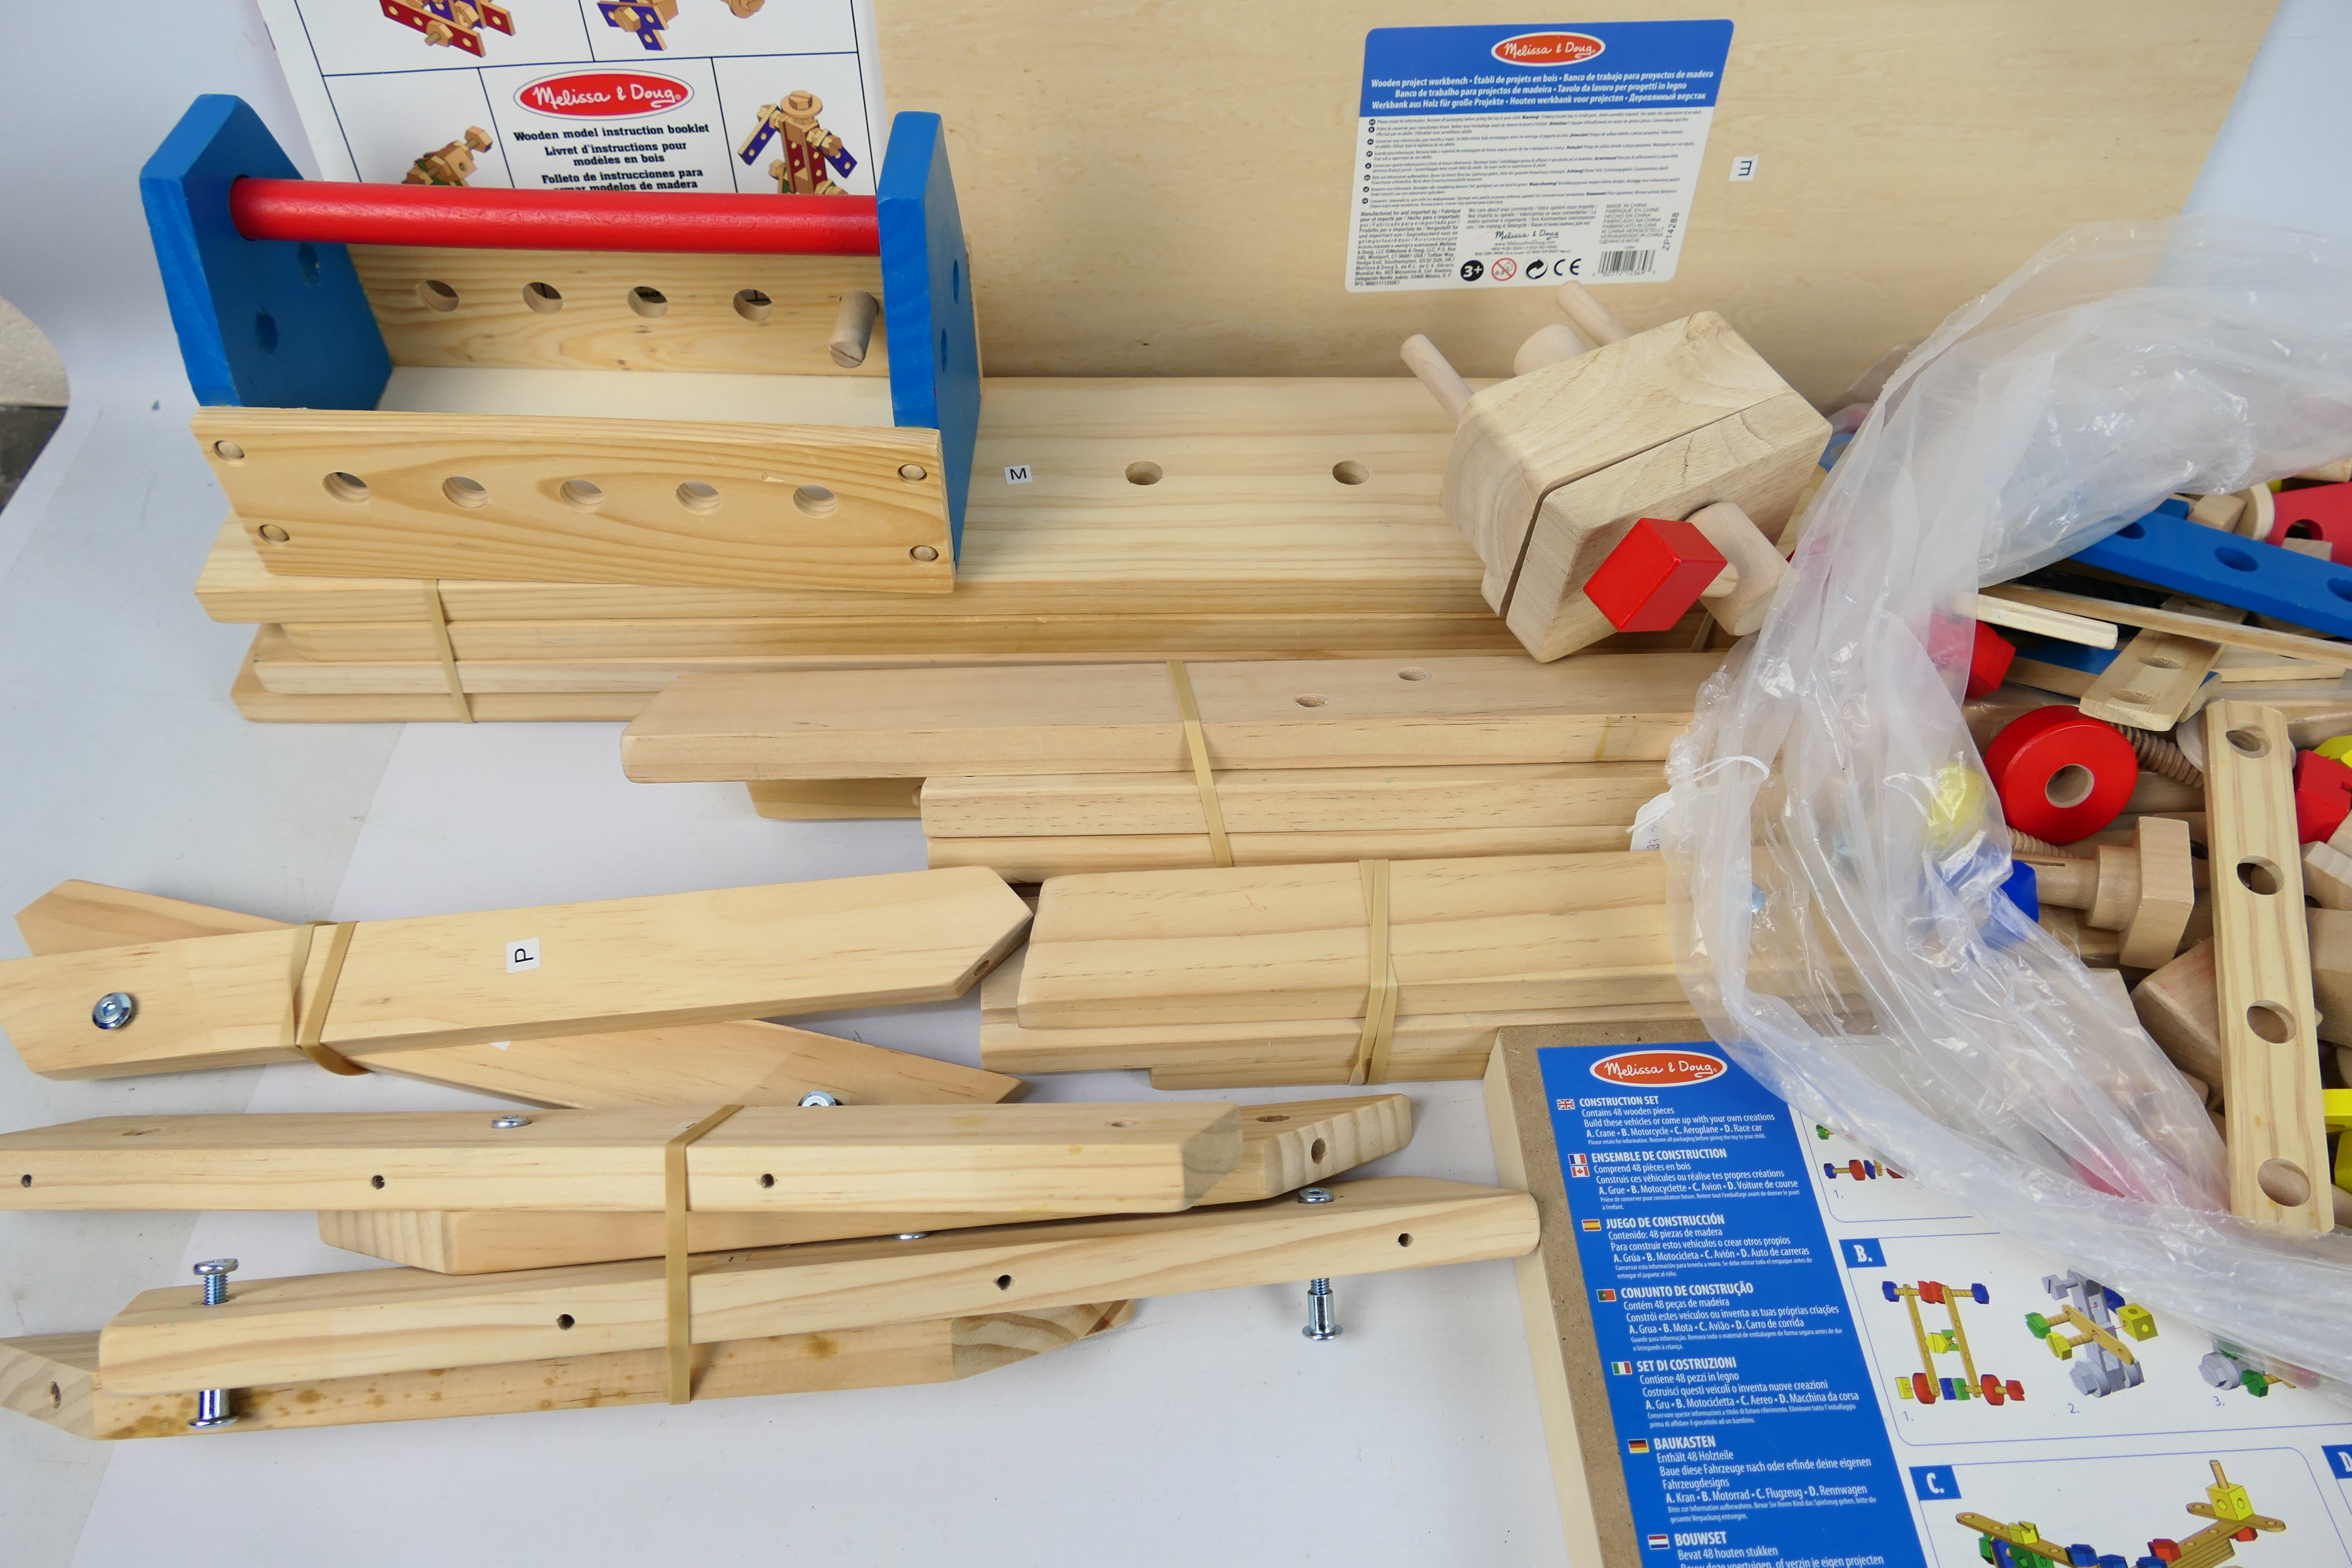 Melissa & Doug - A wooden work bench with tools and a n instruction book by Melissa & Doug Toys. - Image 3 of 4